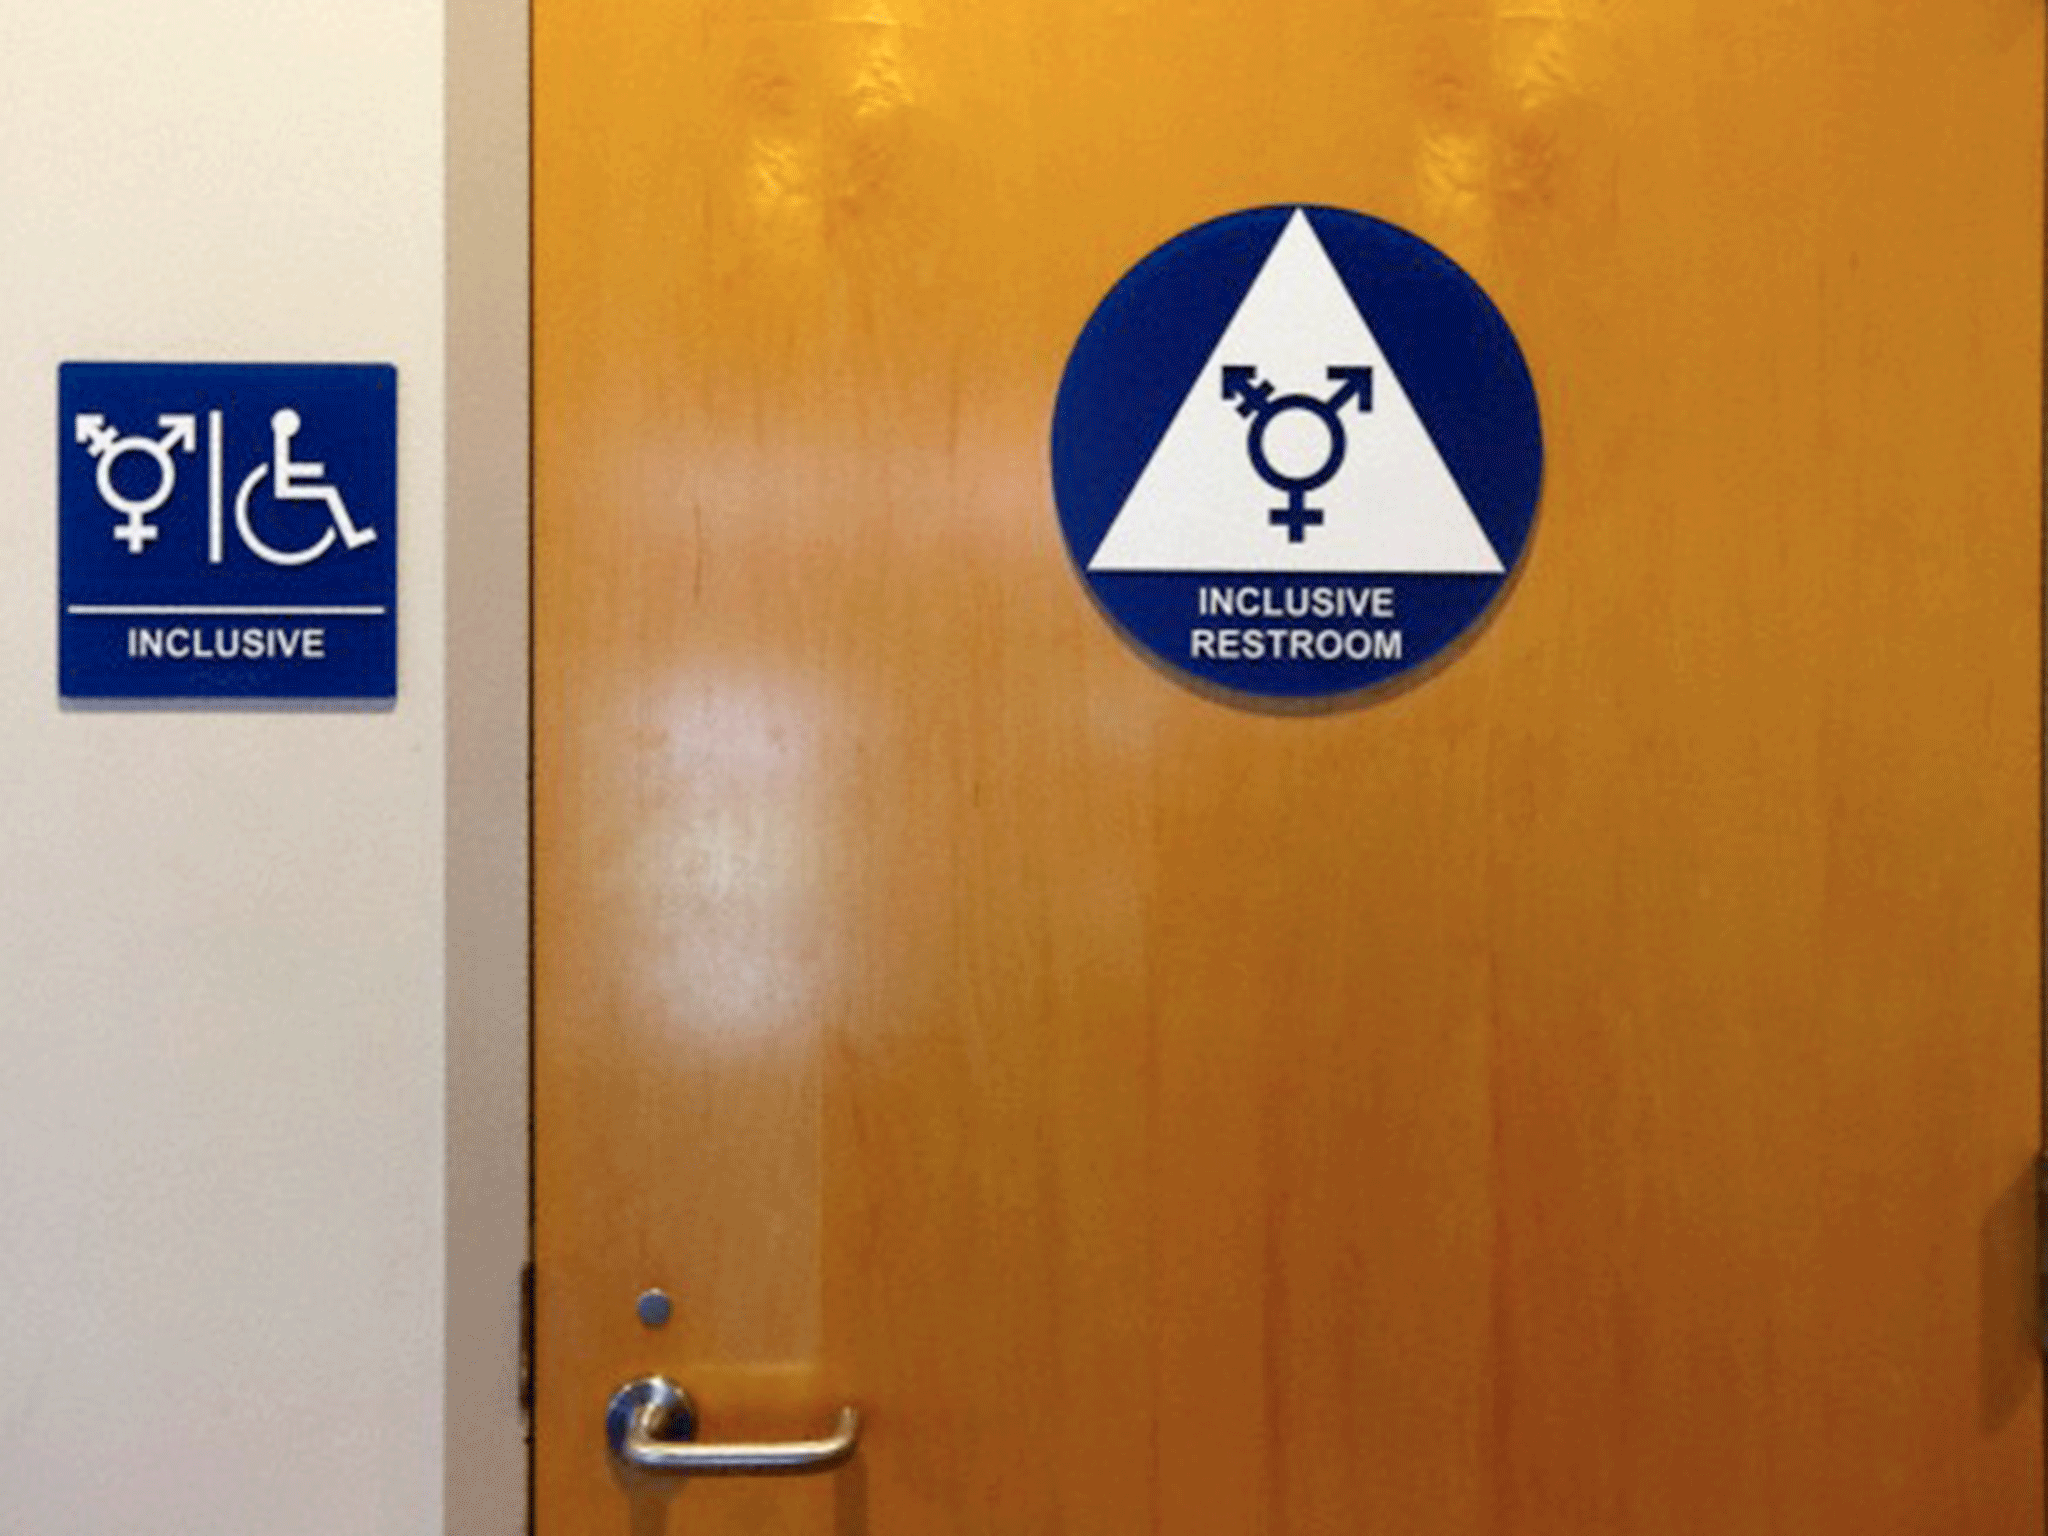 Unlike these toilets at a university in Canada, the school in Iceland has simply decided to remove gender signs on their bathrooms